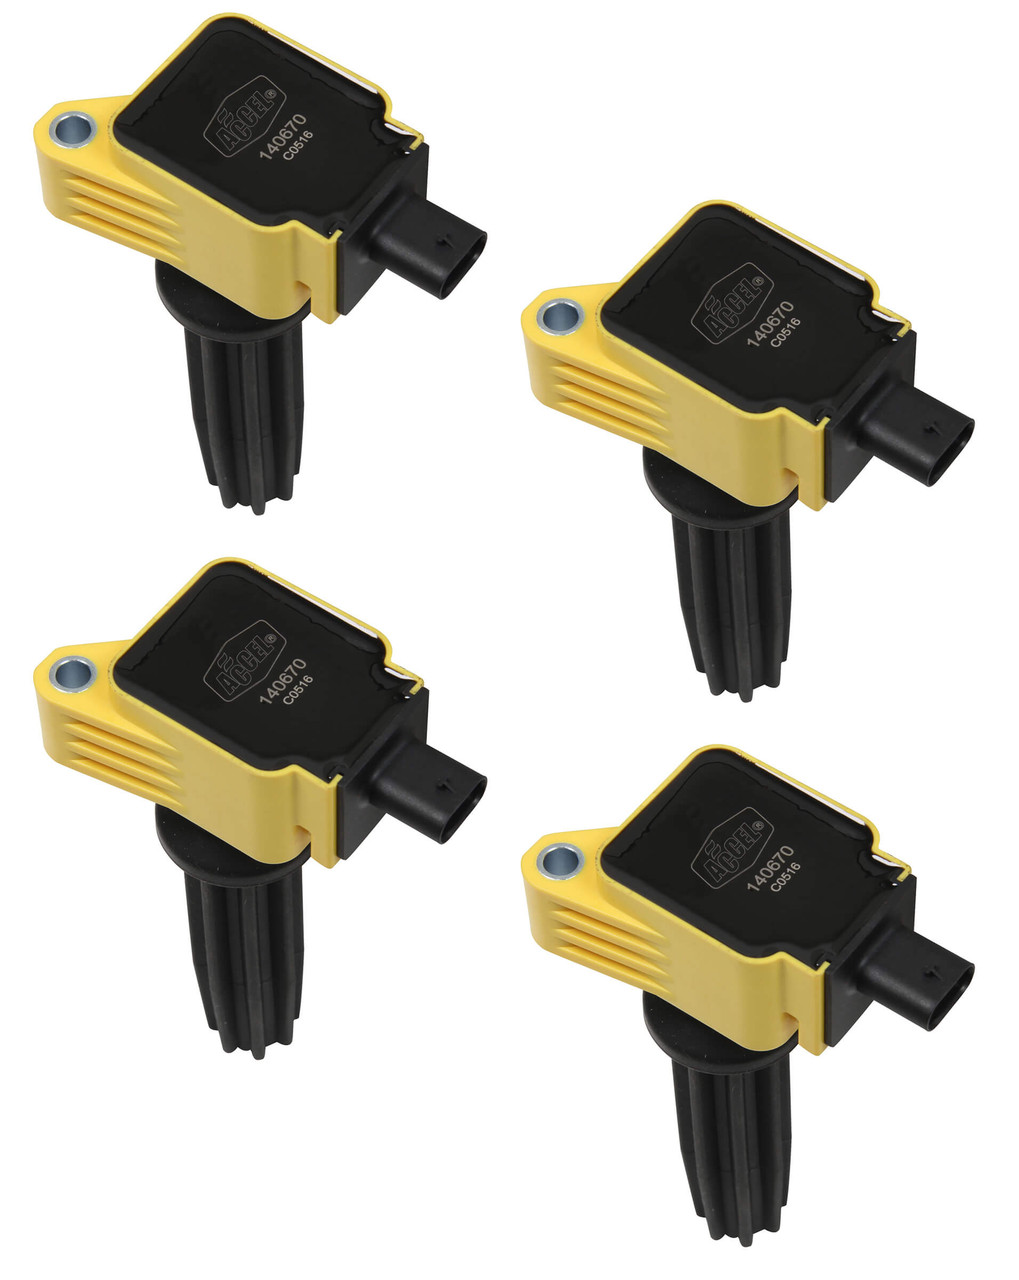 140670-4 Accel Ignition Coil - SuperCoil - Ford EcoBoost 2.0L/2.3L - L4 - 4 Pack